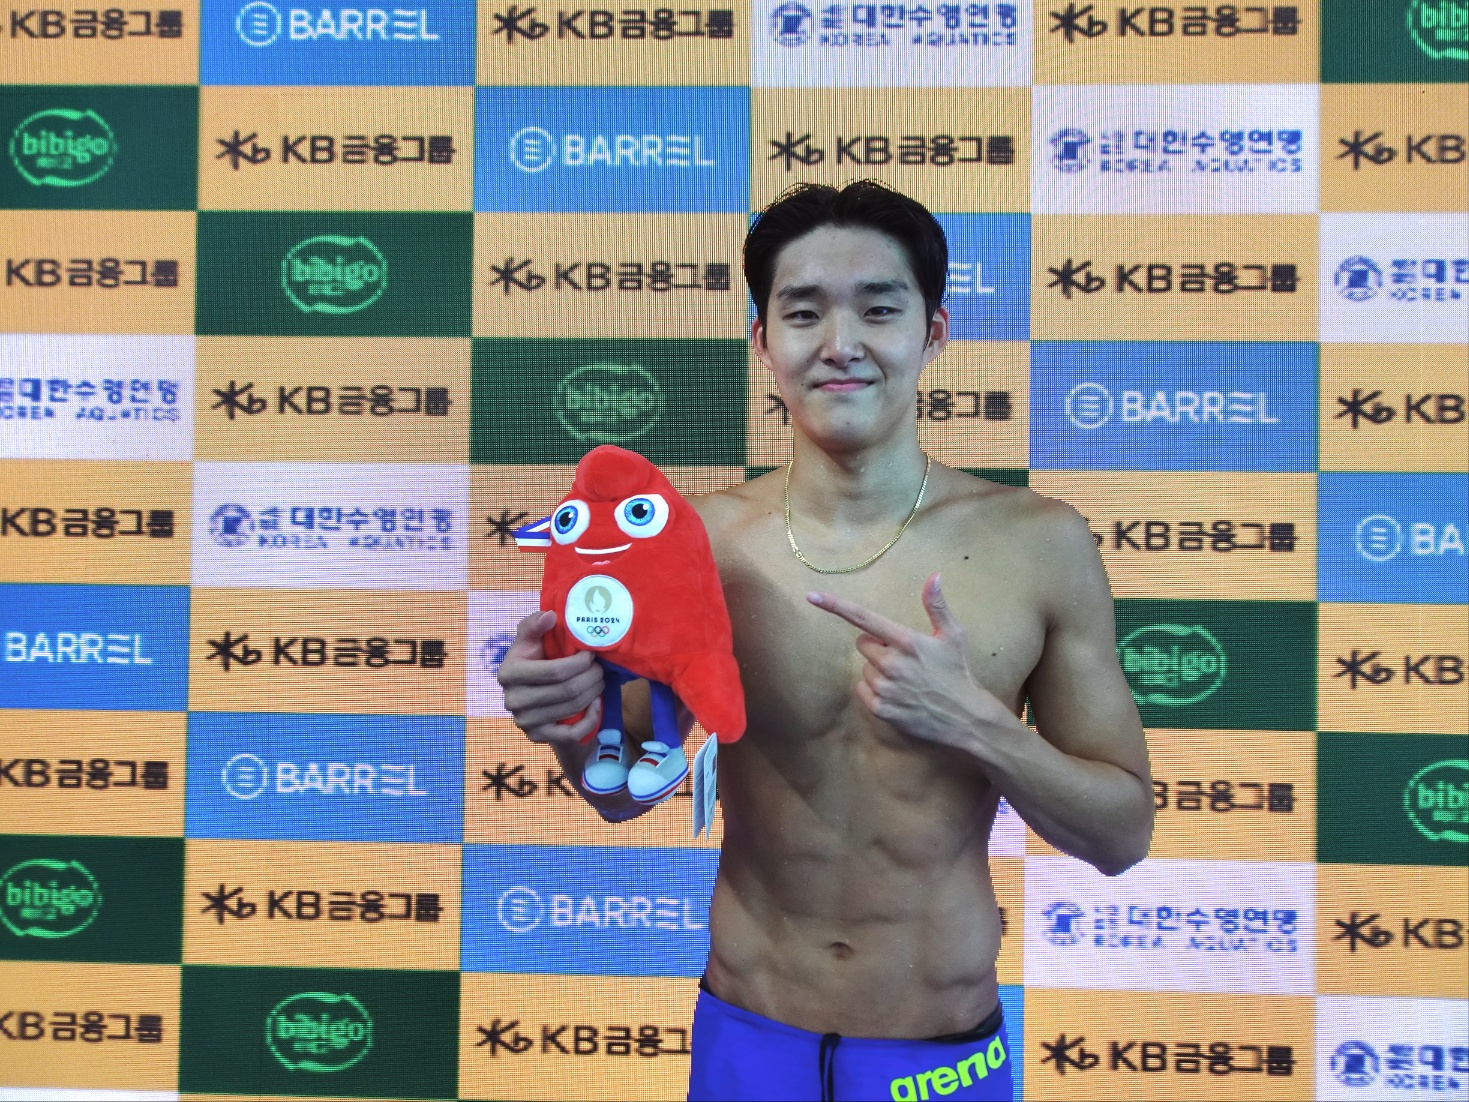 Kim Woomin Dominates Korean Olympic Trials with Impressive Time of 3:43.69 to Secure World Champion Title